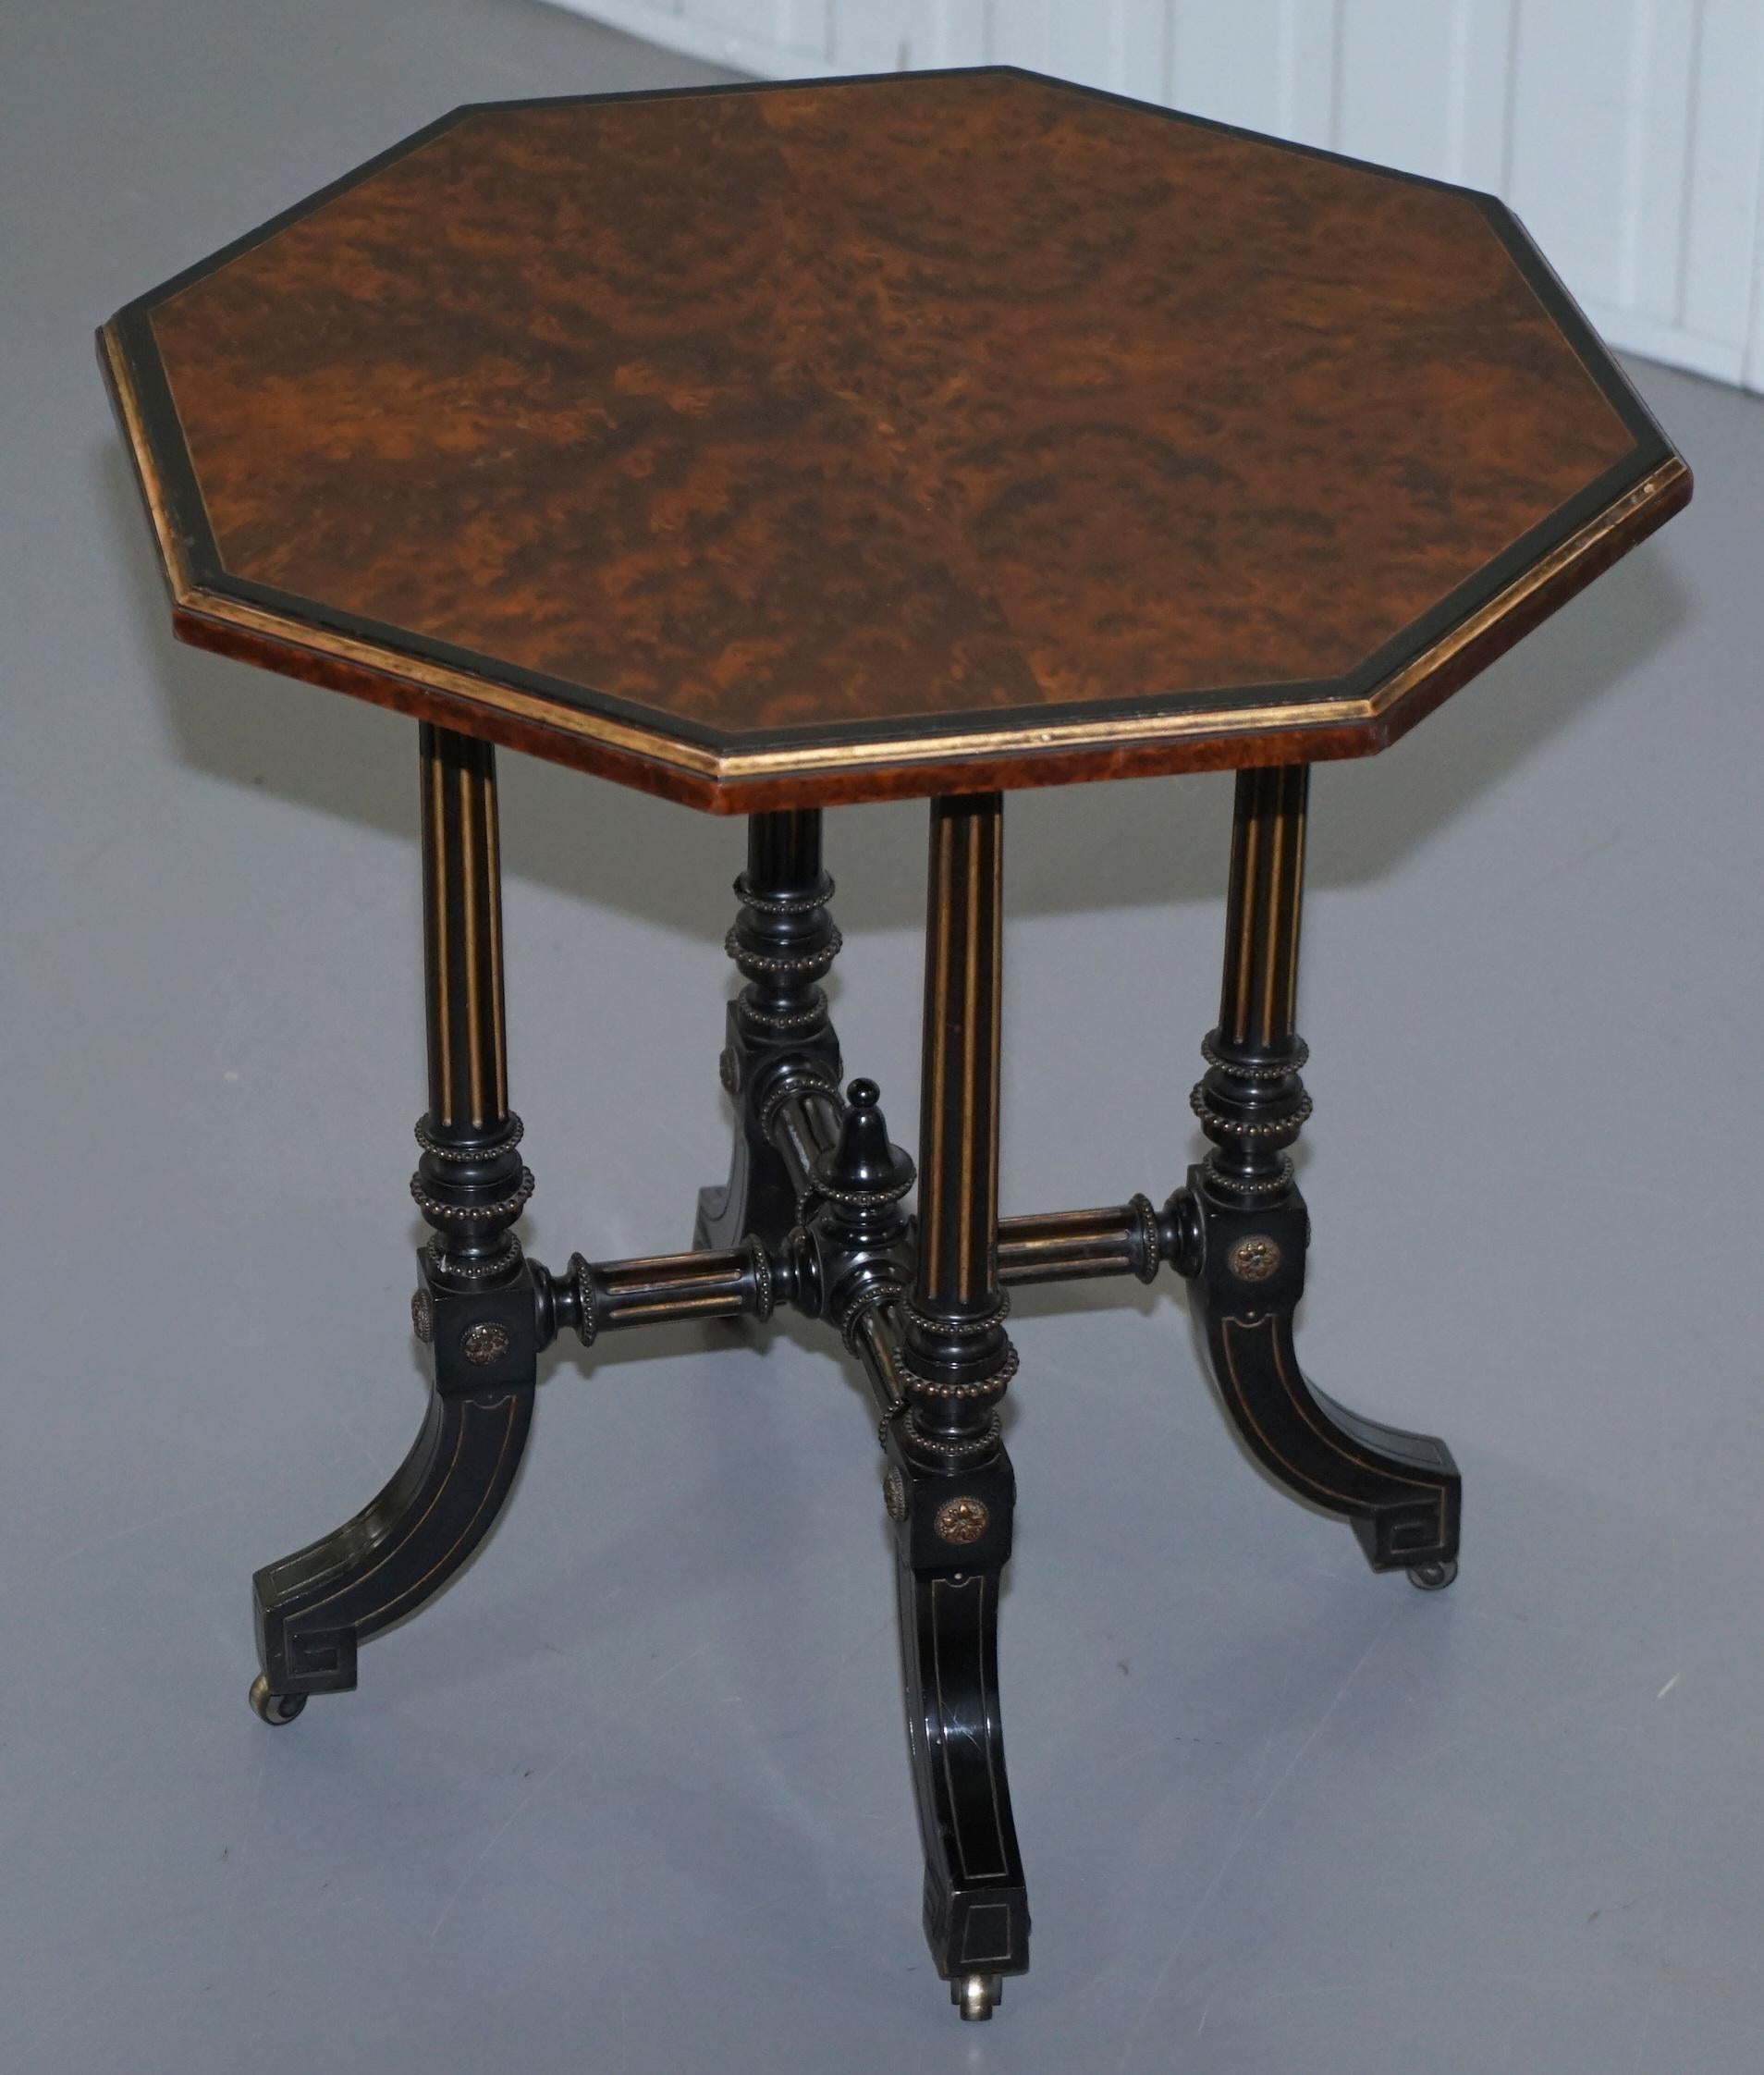 Victorian Very Rare Gillow & Co 1852-1857 Aesthetic Movement Amboyna Ebonised Side Table